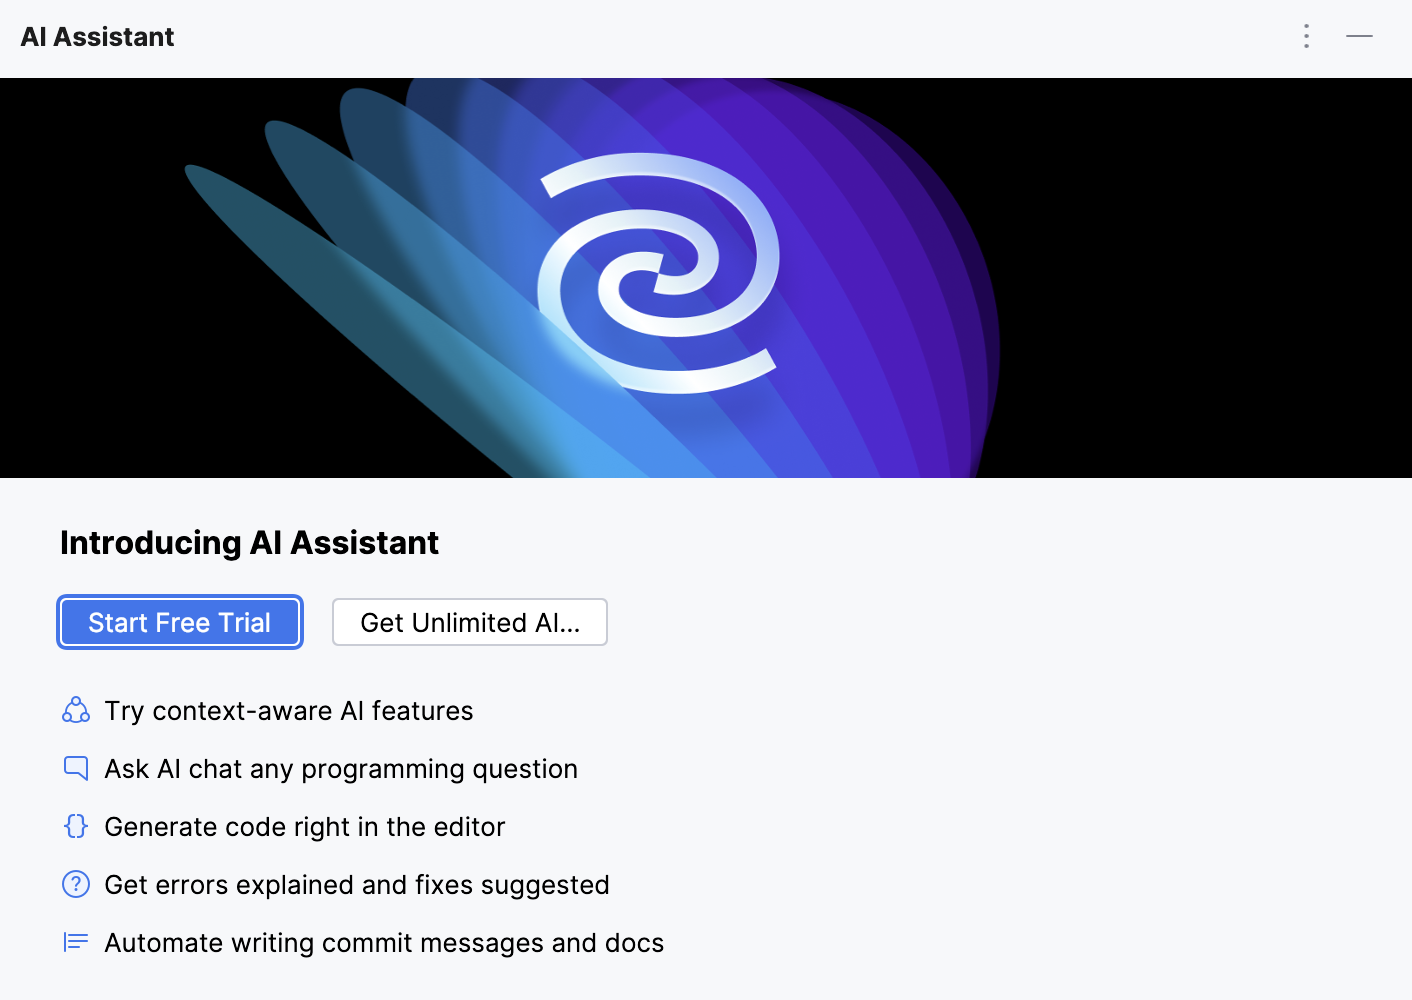 Start Free Trial option in the AI Assistant tool window